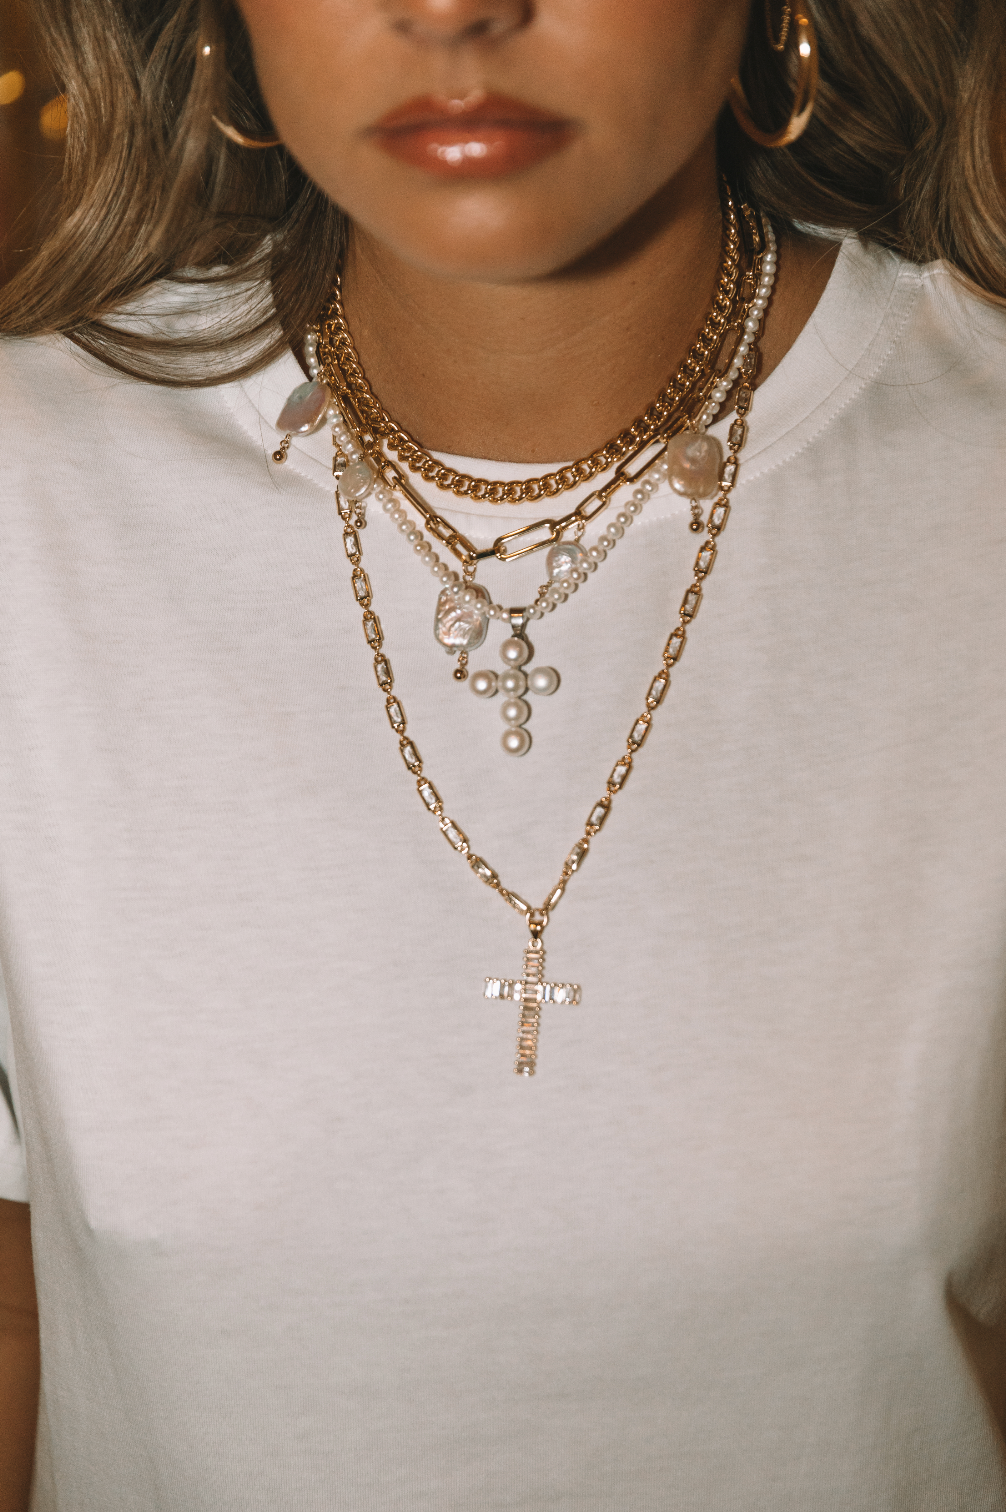 The Pearly Vows Statement Necklace